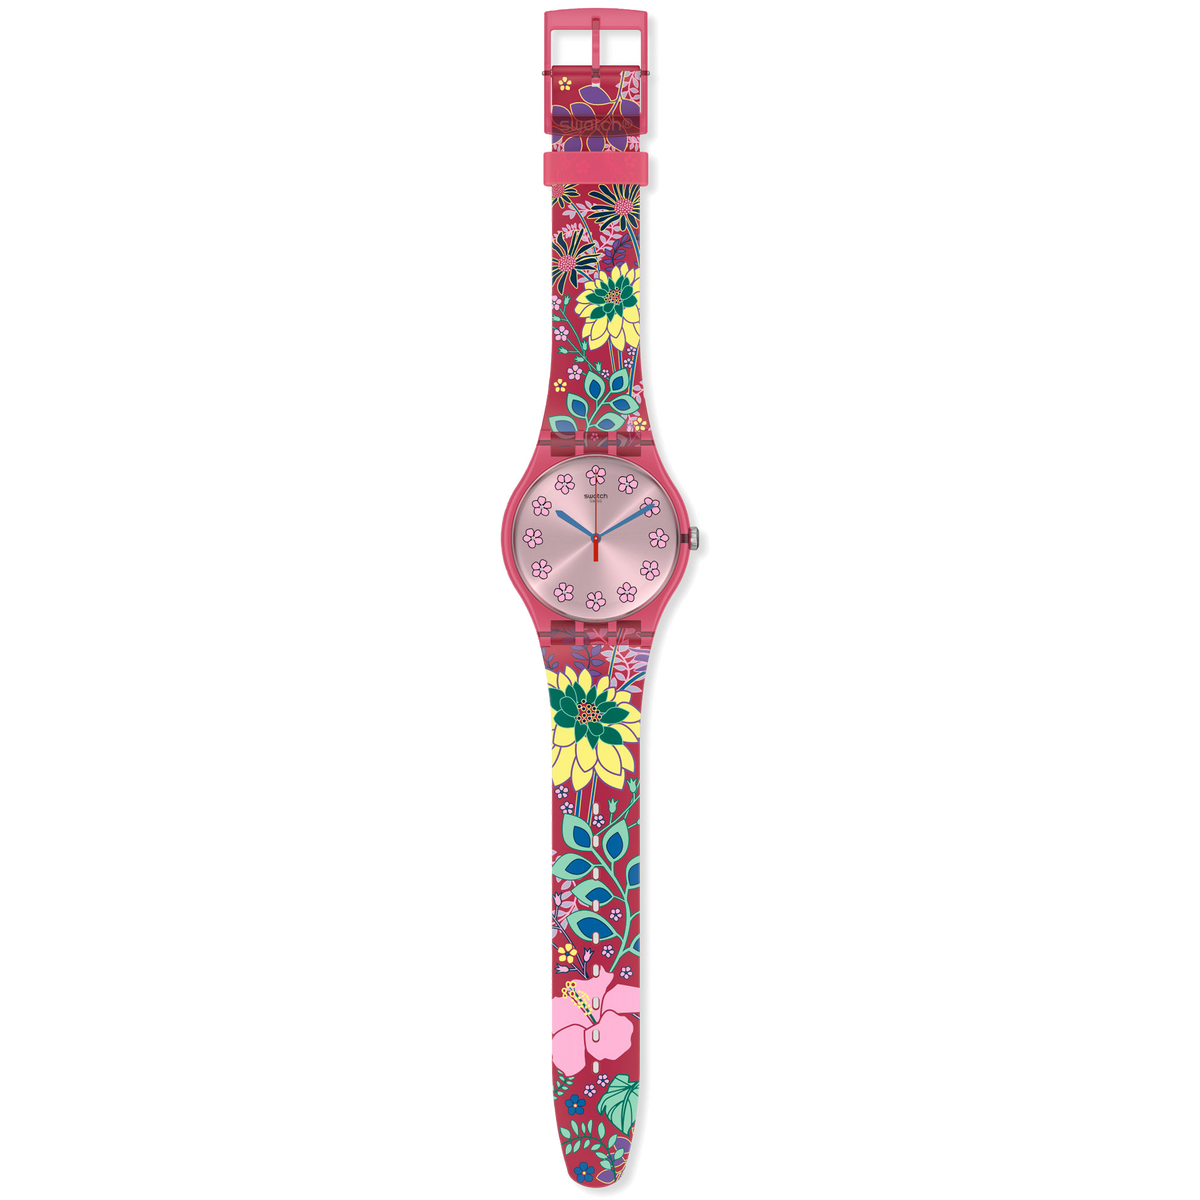 Swatch Watch 41mm - Dhabiscus